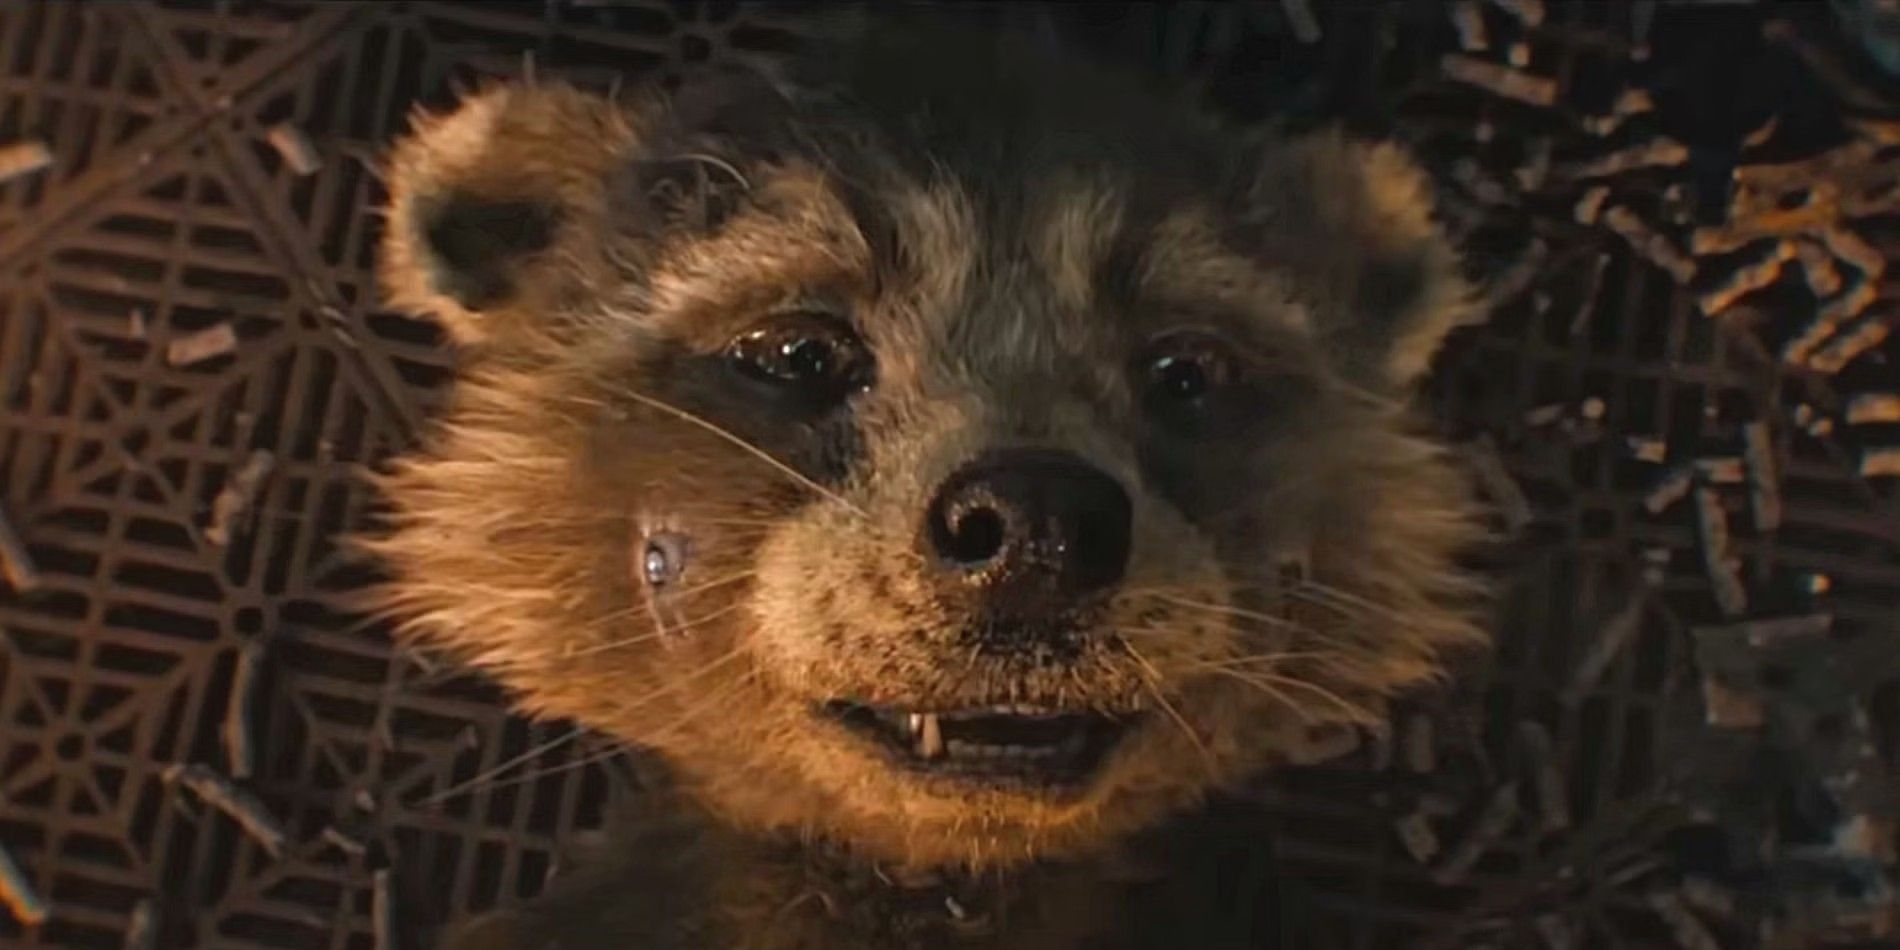 Rocket Raccoon has a near death experience in Guardians of the Galaxy Vol. 3